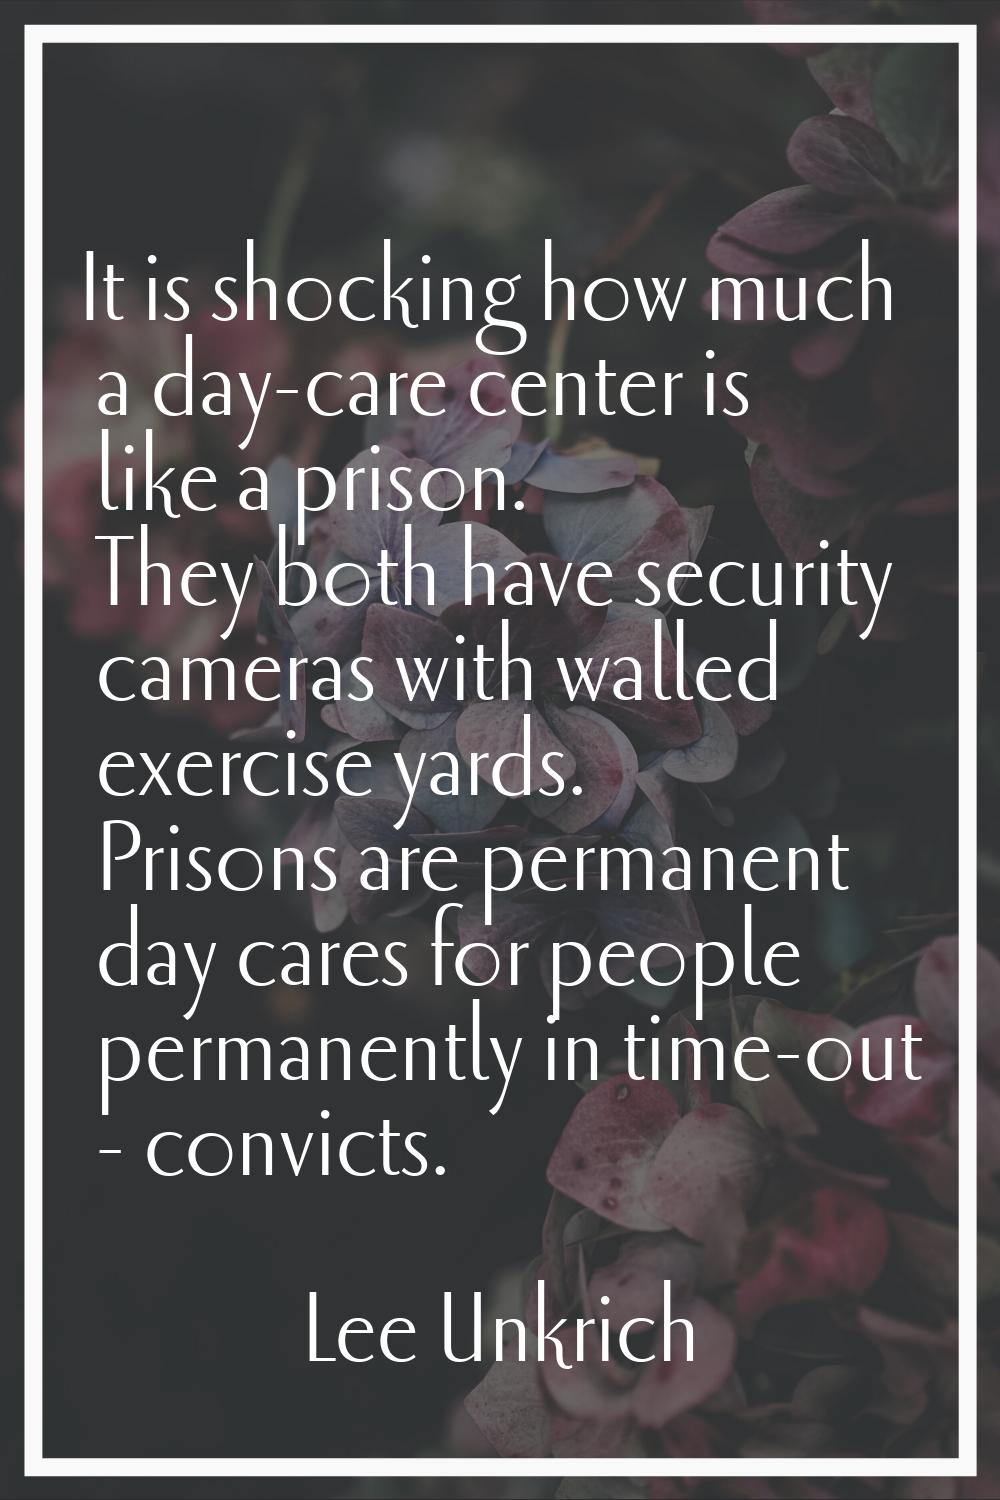 It is shocking how much a day-care center is like a prison. They both have security cameras with wa